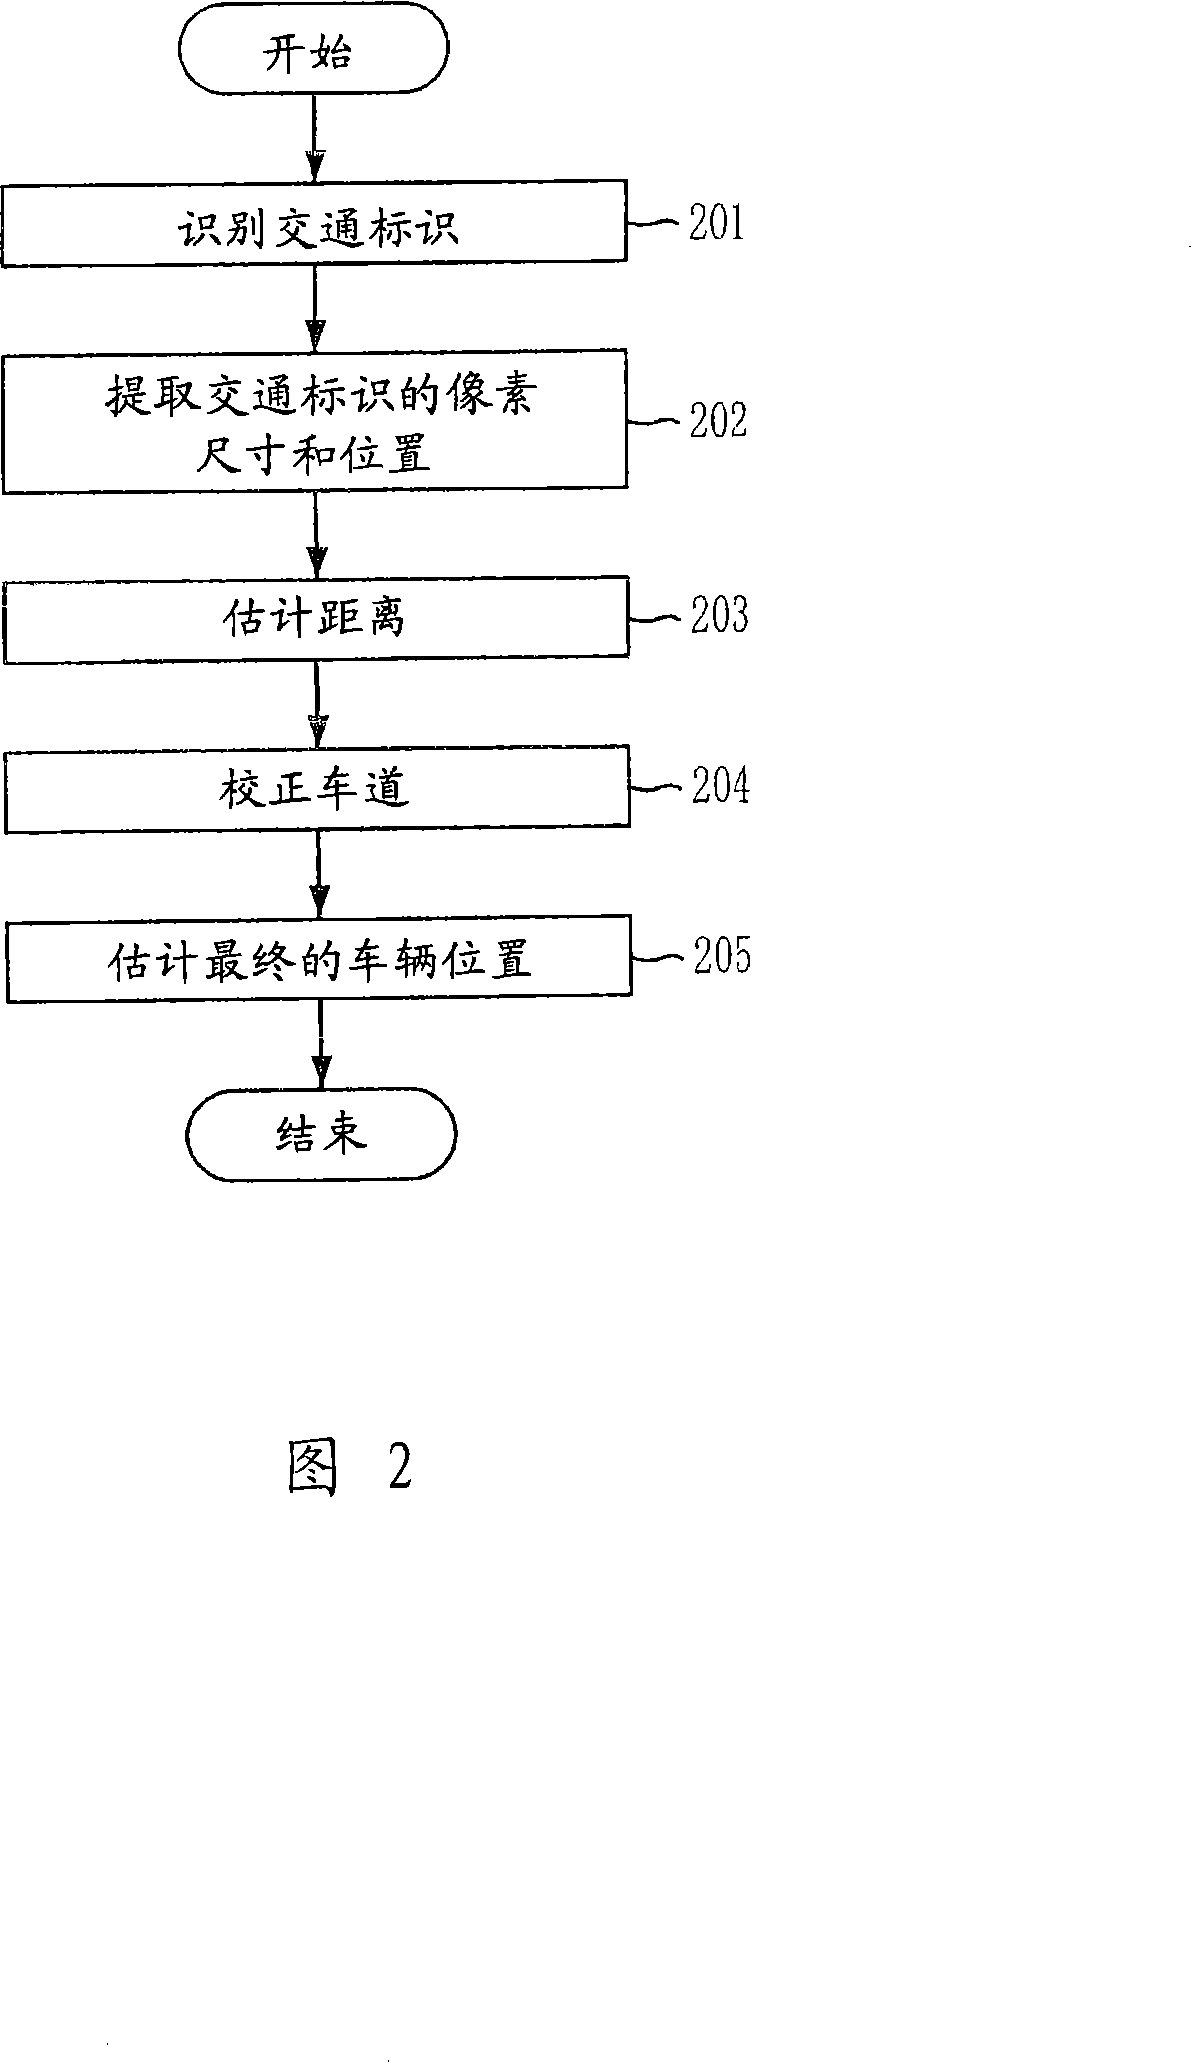 Vehicle position estimation device and its method